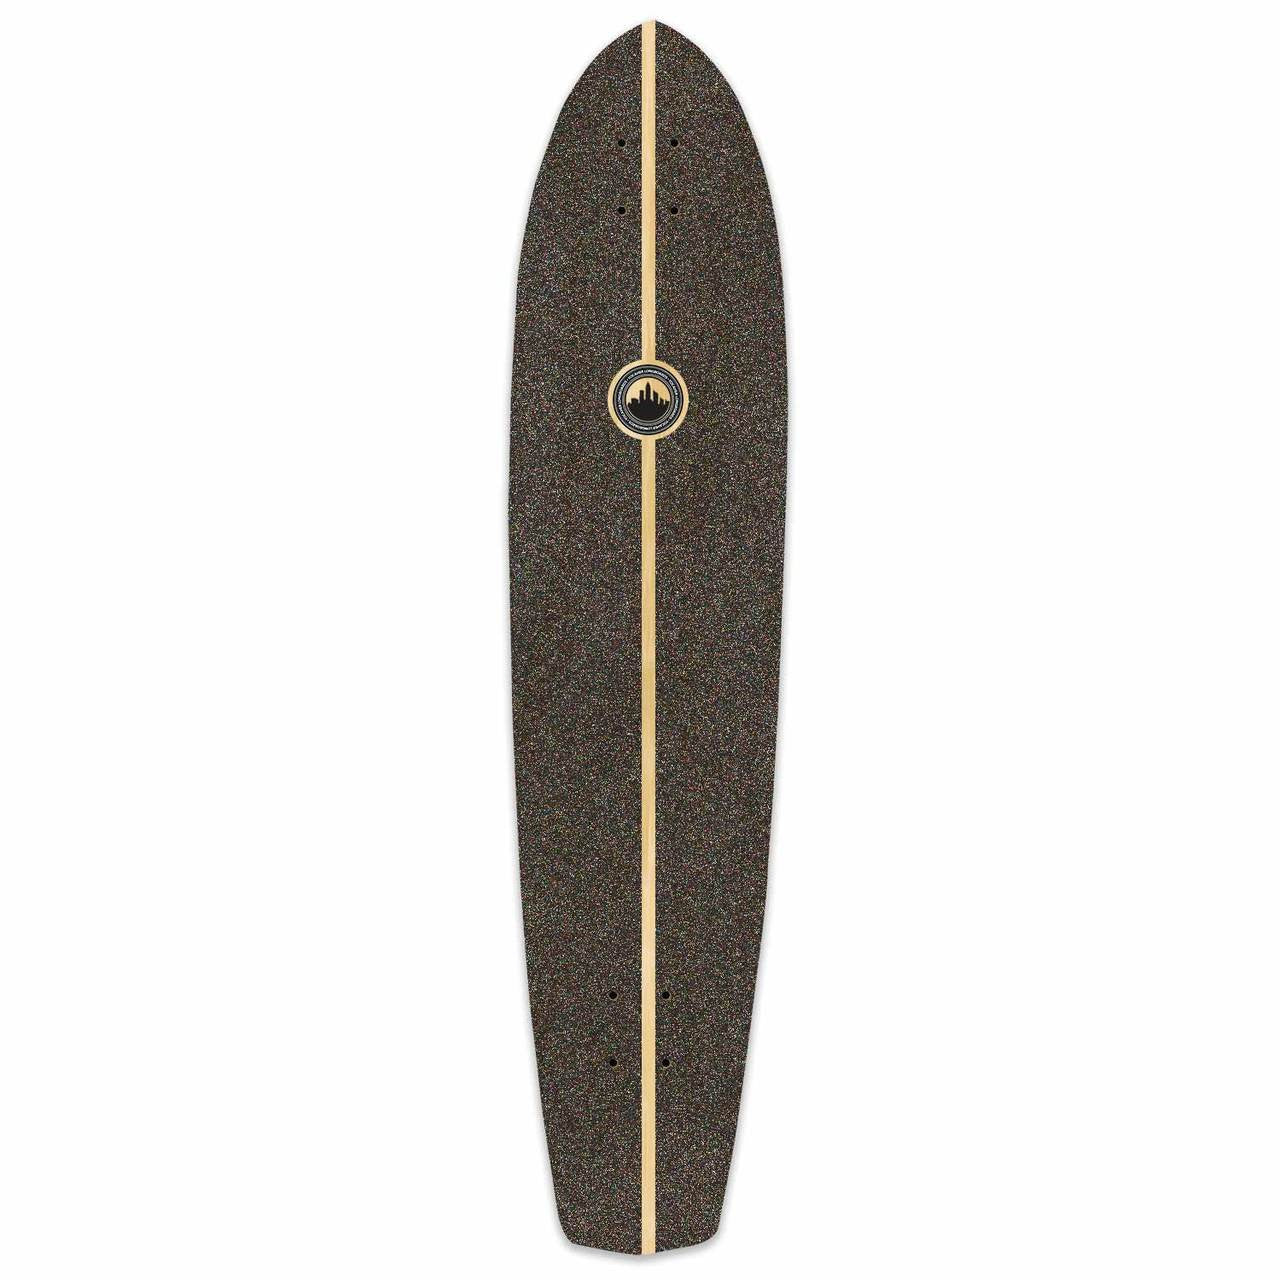 Yocaher Slimkick Longboard Deck - Stained Blue